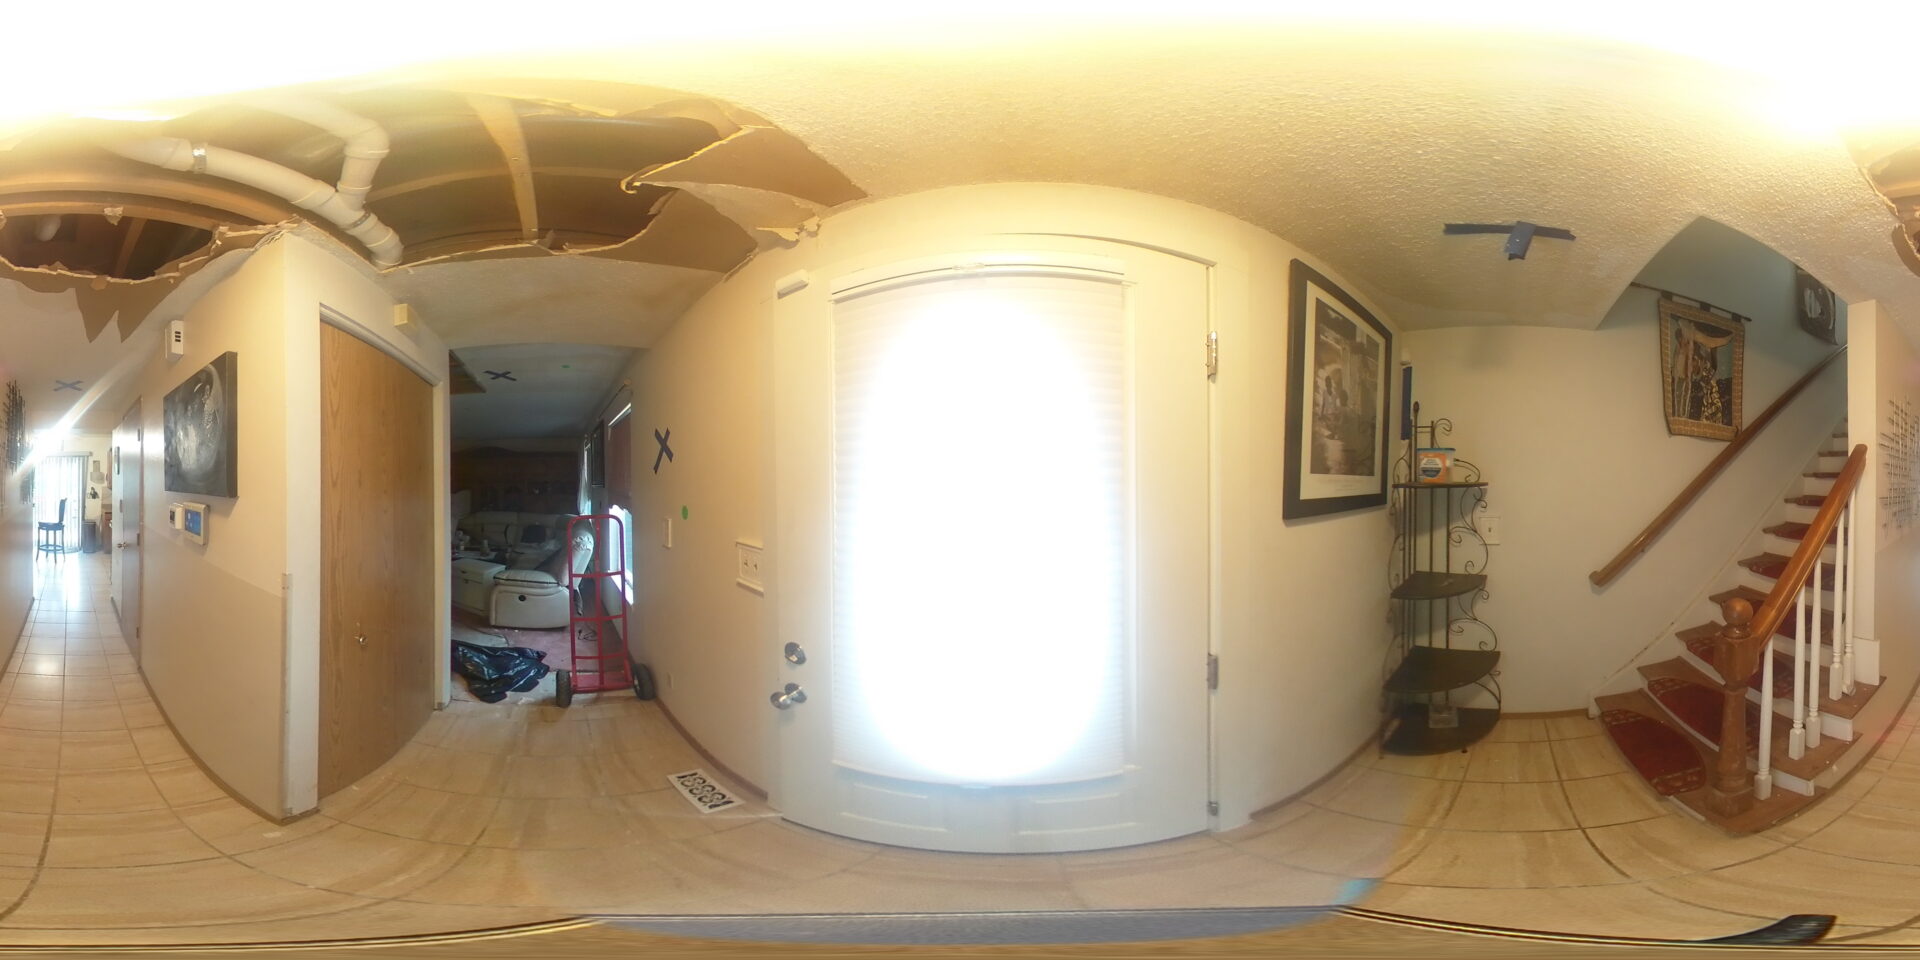 A fisheye view of the doorway to a room.